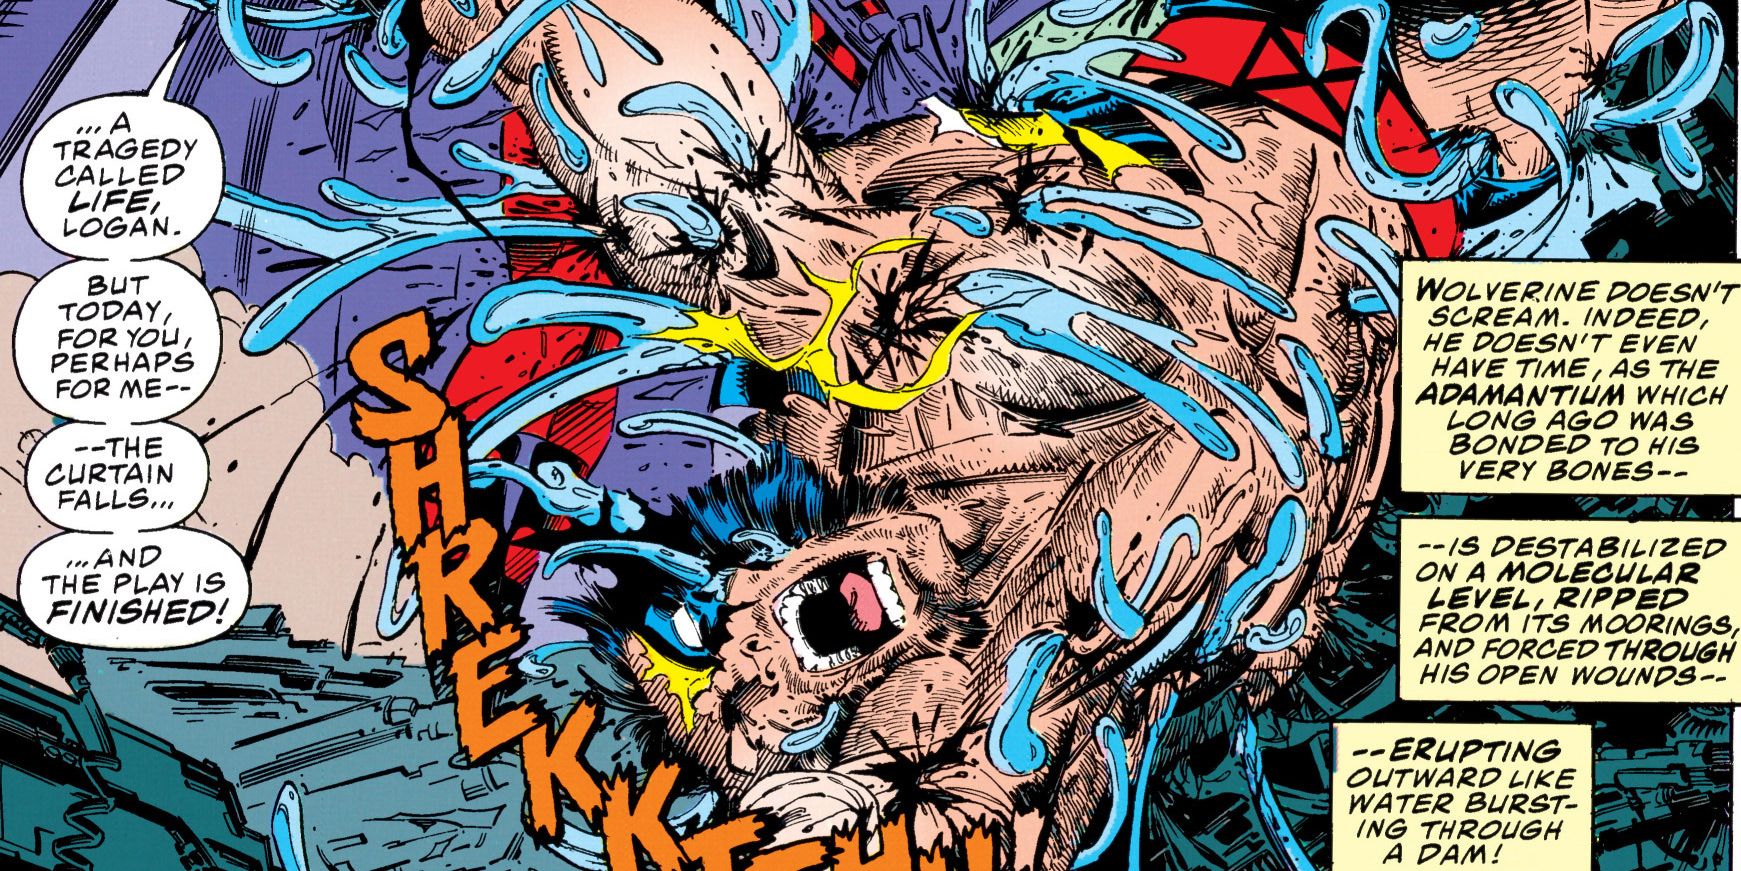 Wolverine getting his adamantium ripped out by Magneto in Marvel Comics' X-Men Vol. 2 #25